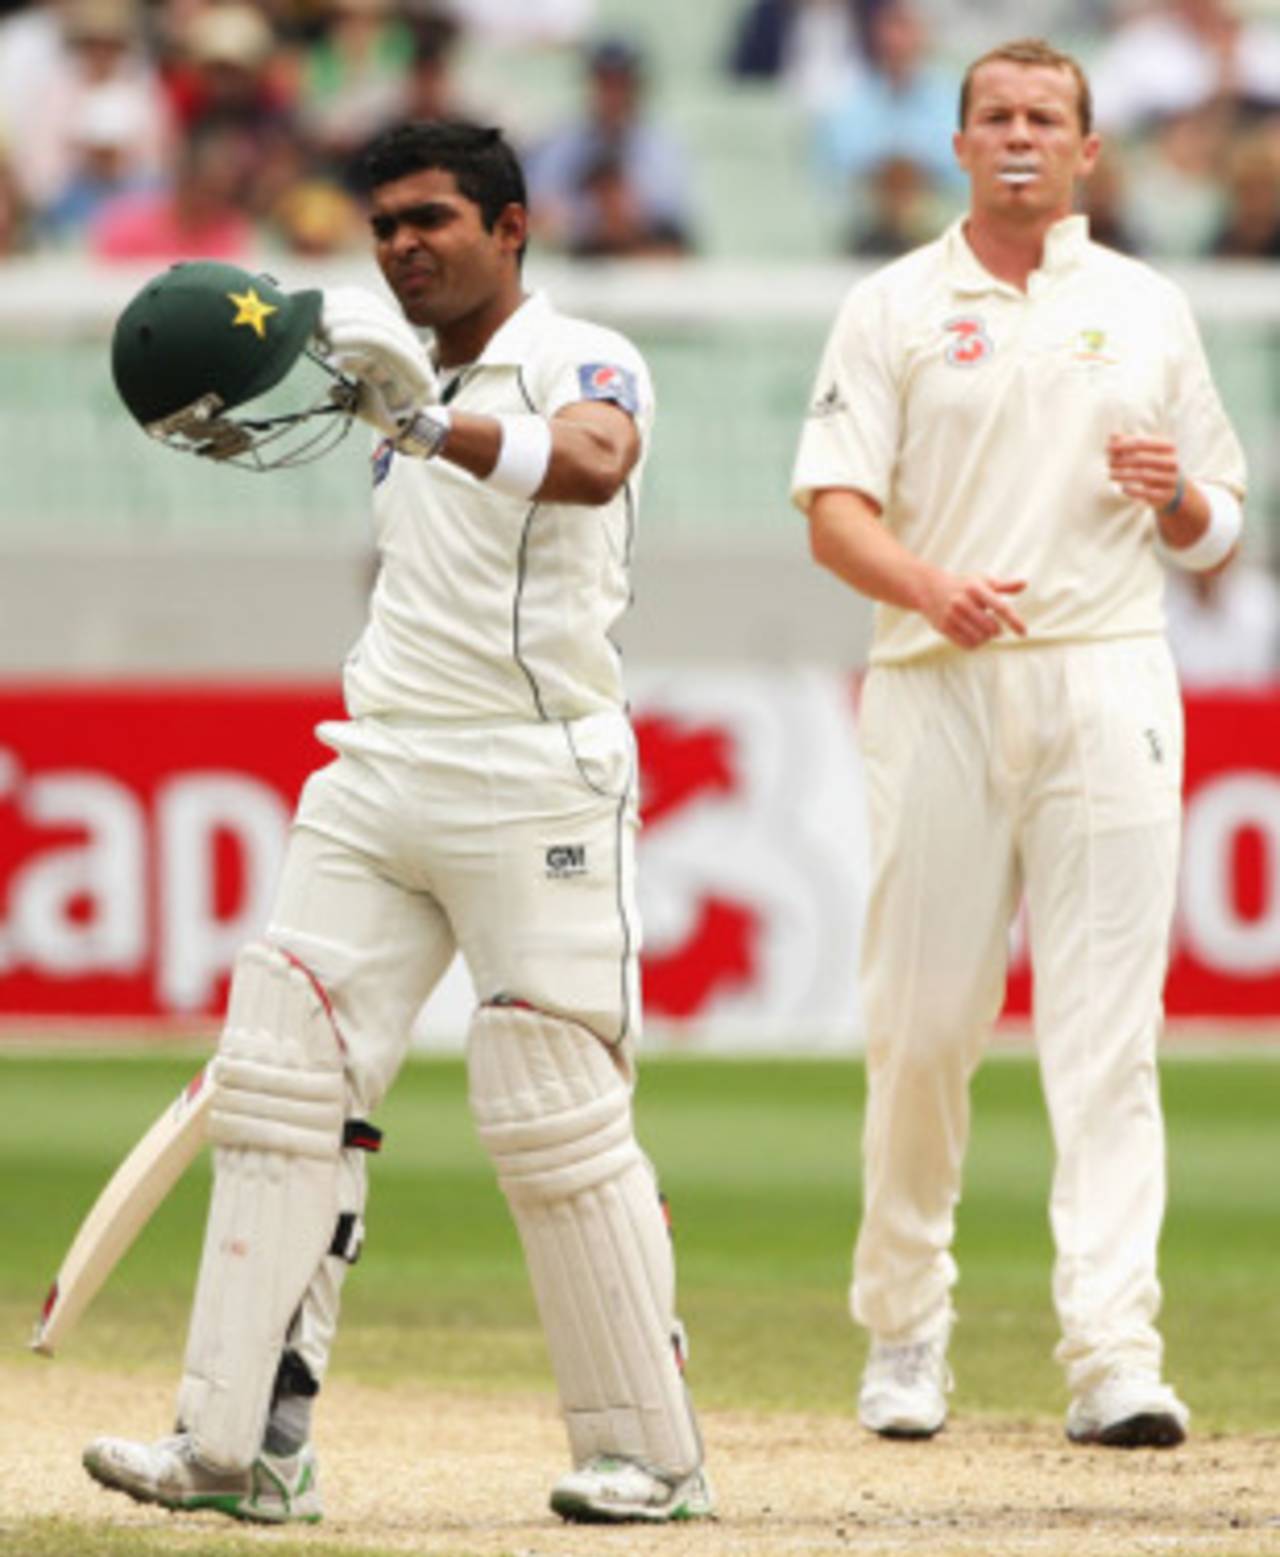 Umar Akmal gave Peter Siddle a fitting reply after the blow to the helmet&nbsp;&nbsp;&bull;&nbsp;&nbsp;Getty Images